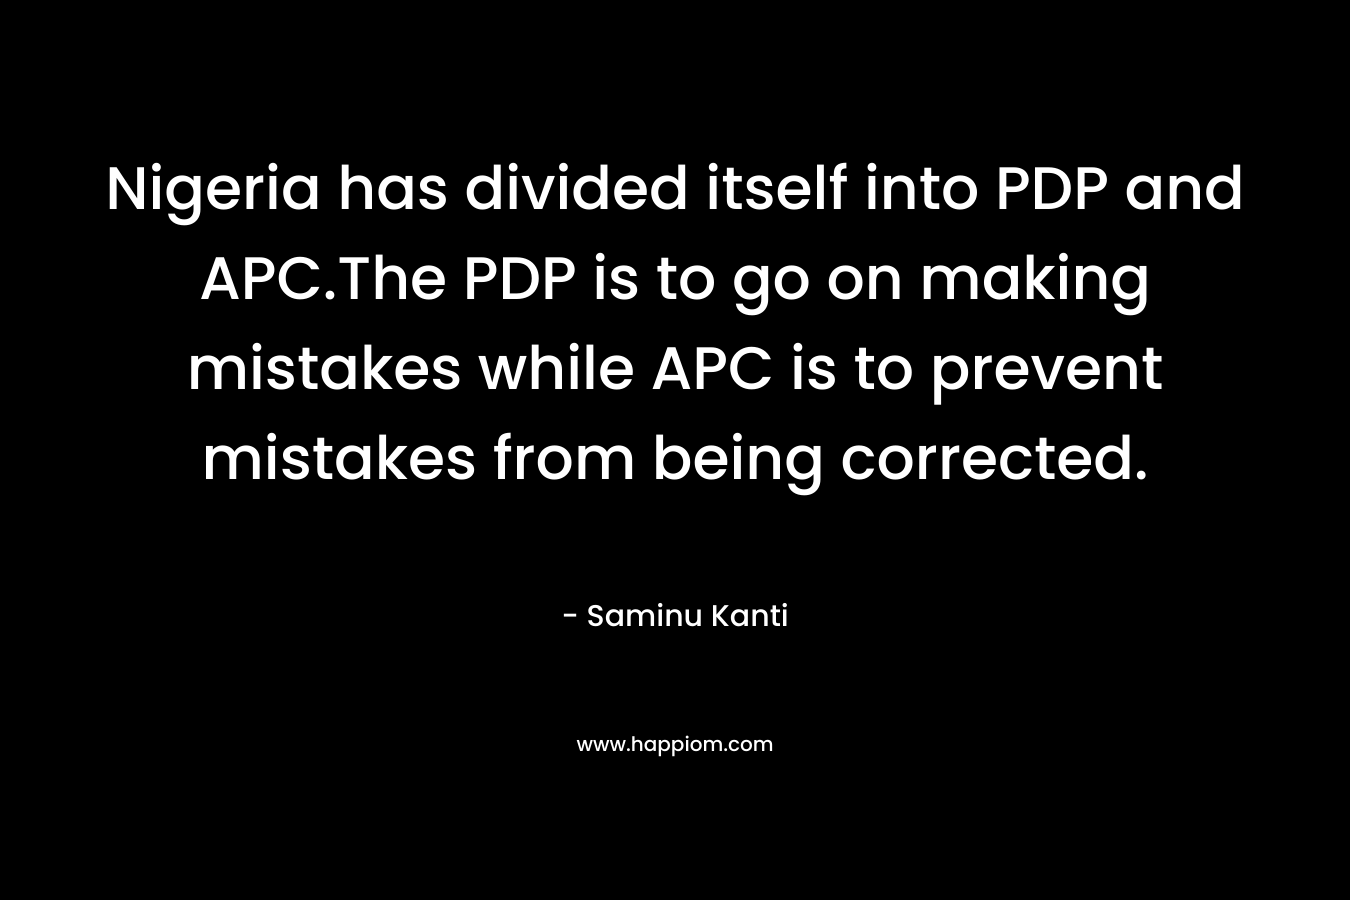 Nigeria has divided itself into PDP and APC.The PDP is to go on making mistakes while APC is to prevent mistakes from being corrected.